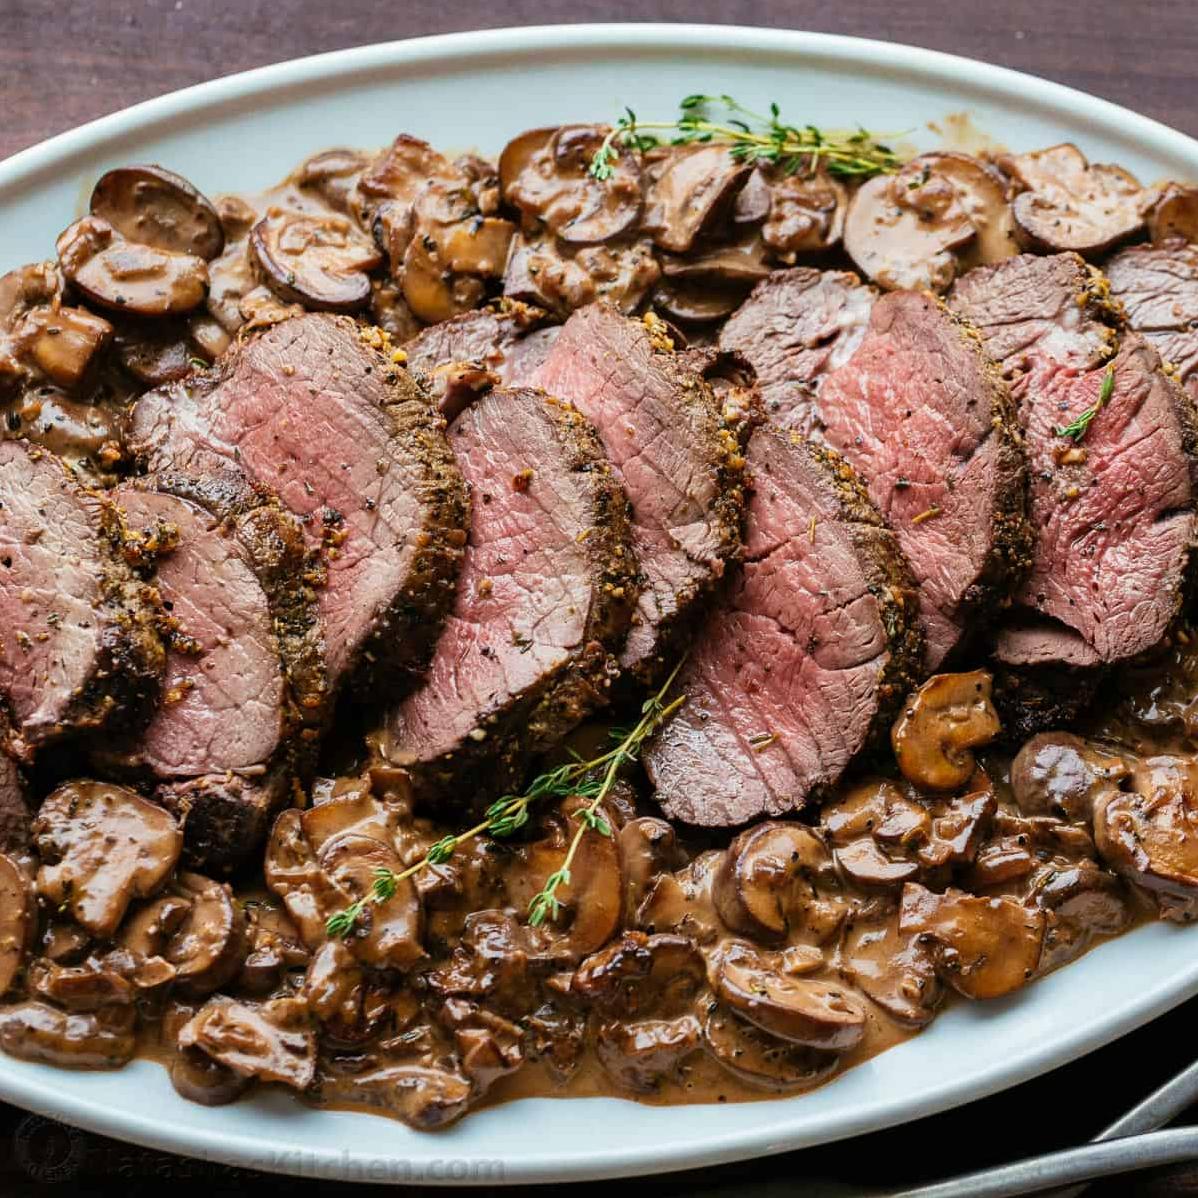  Juicy beef tenderloin steak served with sautéed mushrooms and onions, drizzled with red wine sauce.